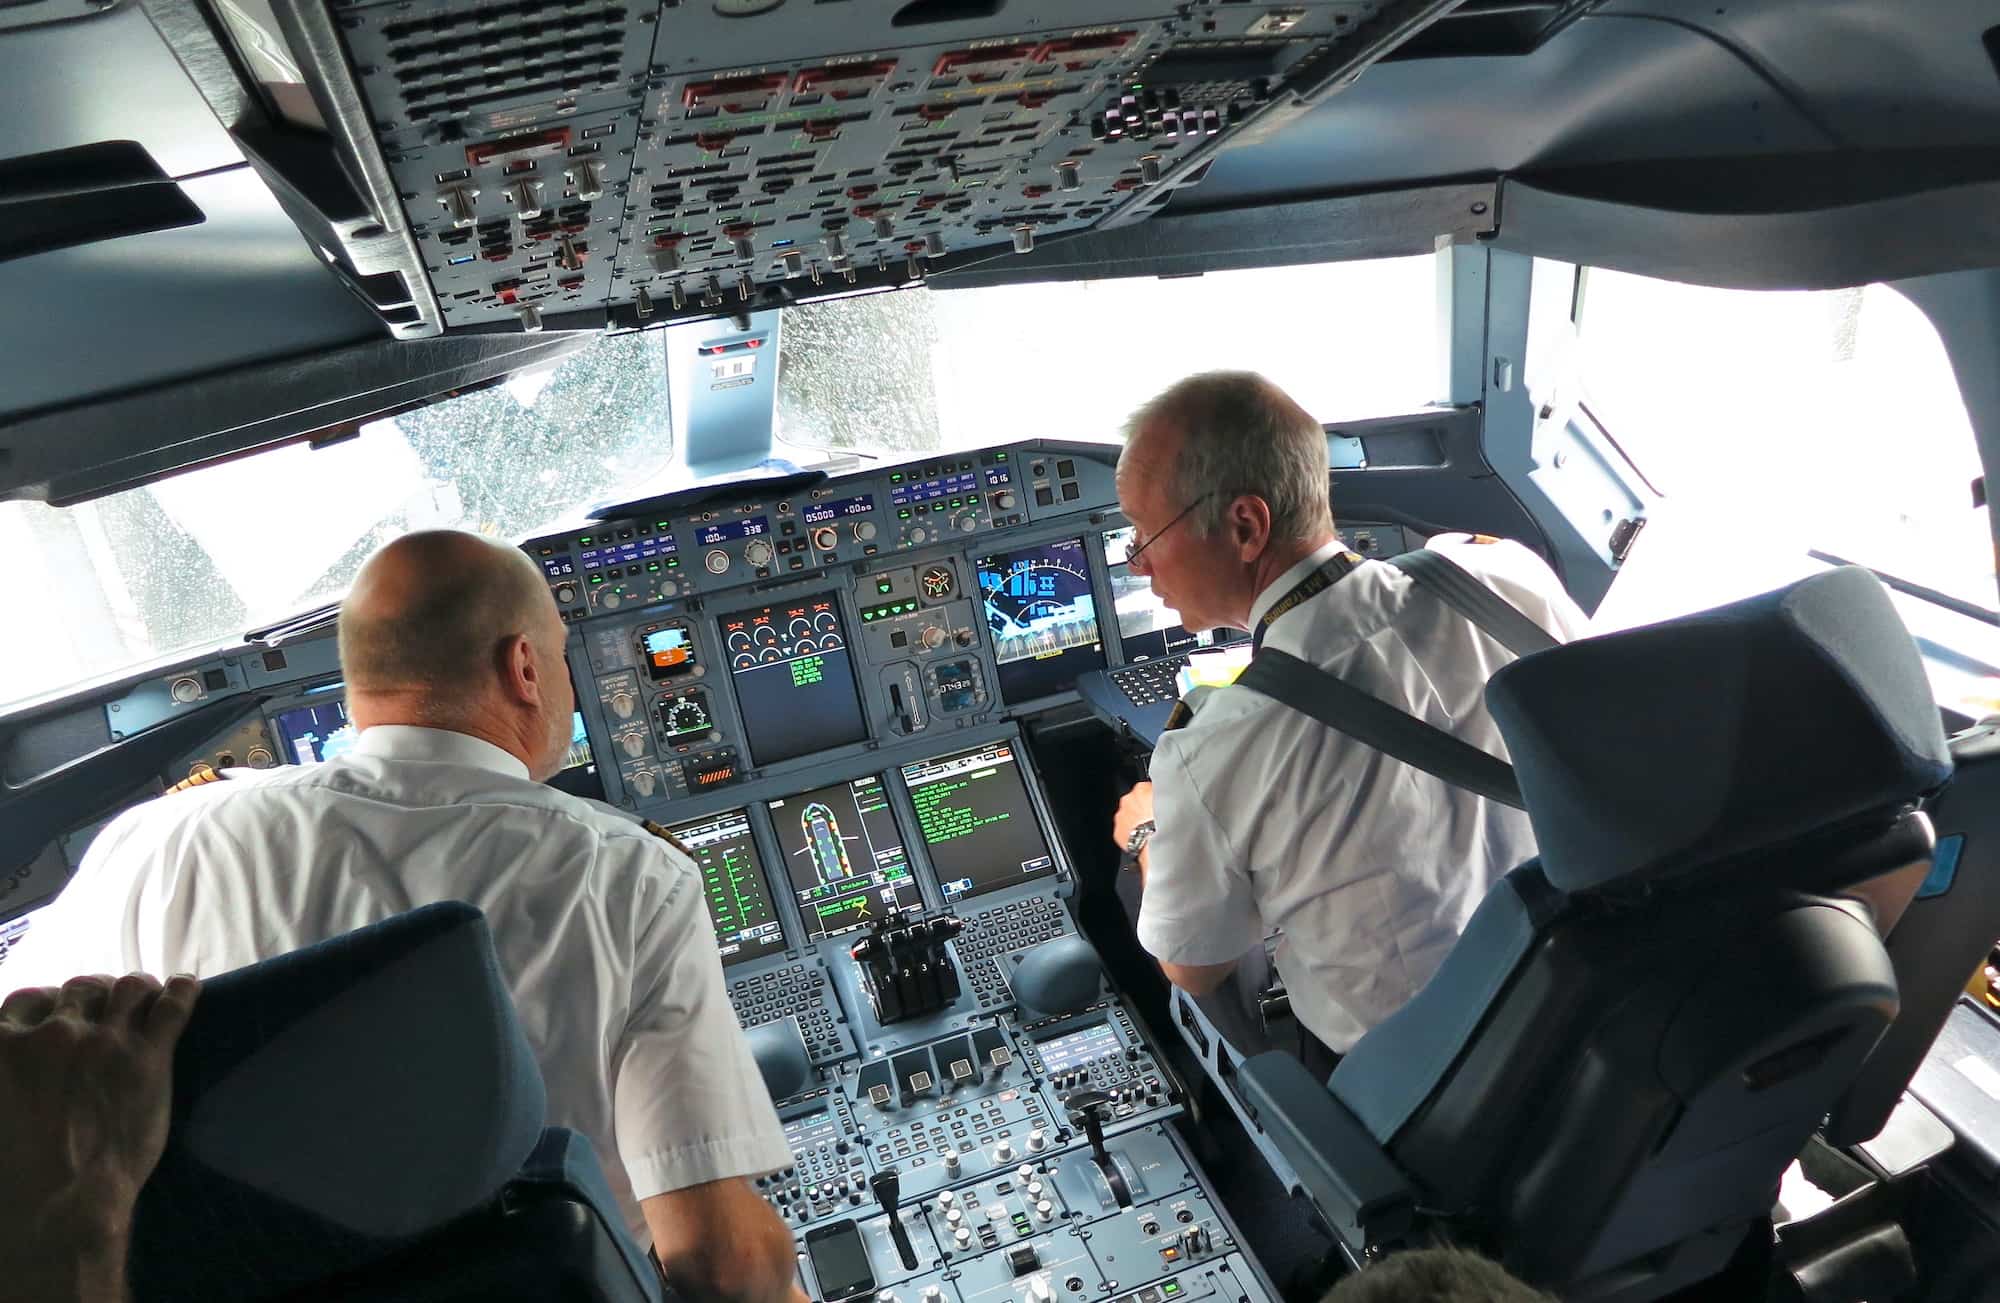 The cockpit of an Airbus A380. Photo by Steve Jurvetson, CC BY 2.0